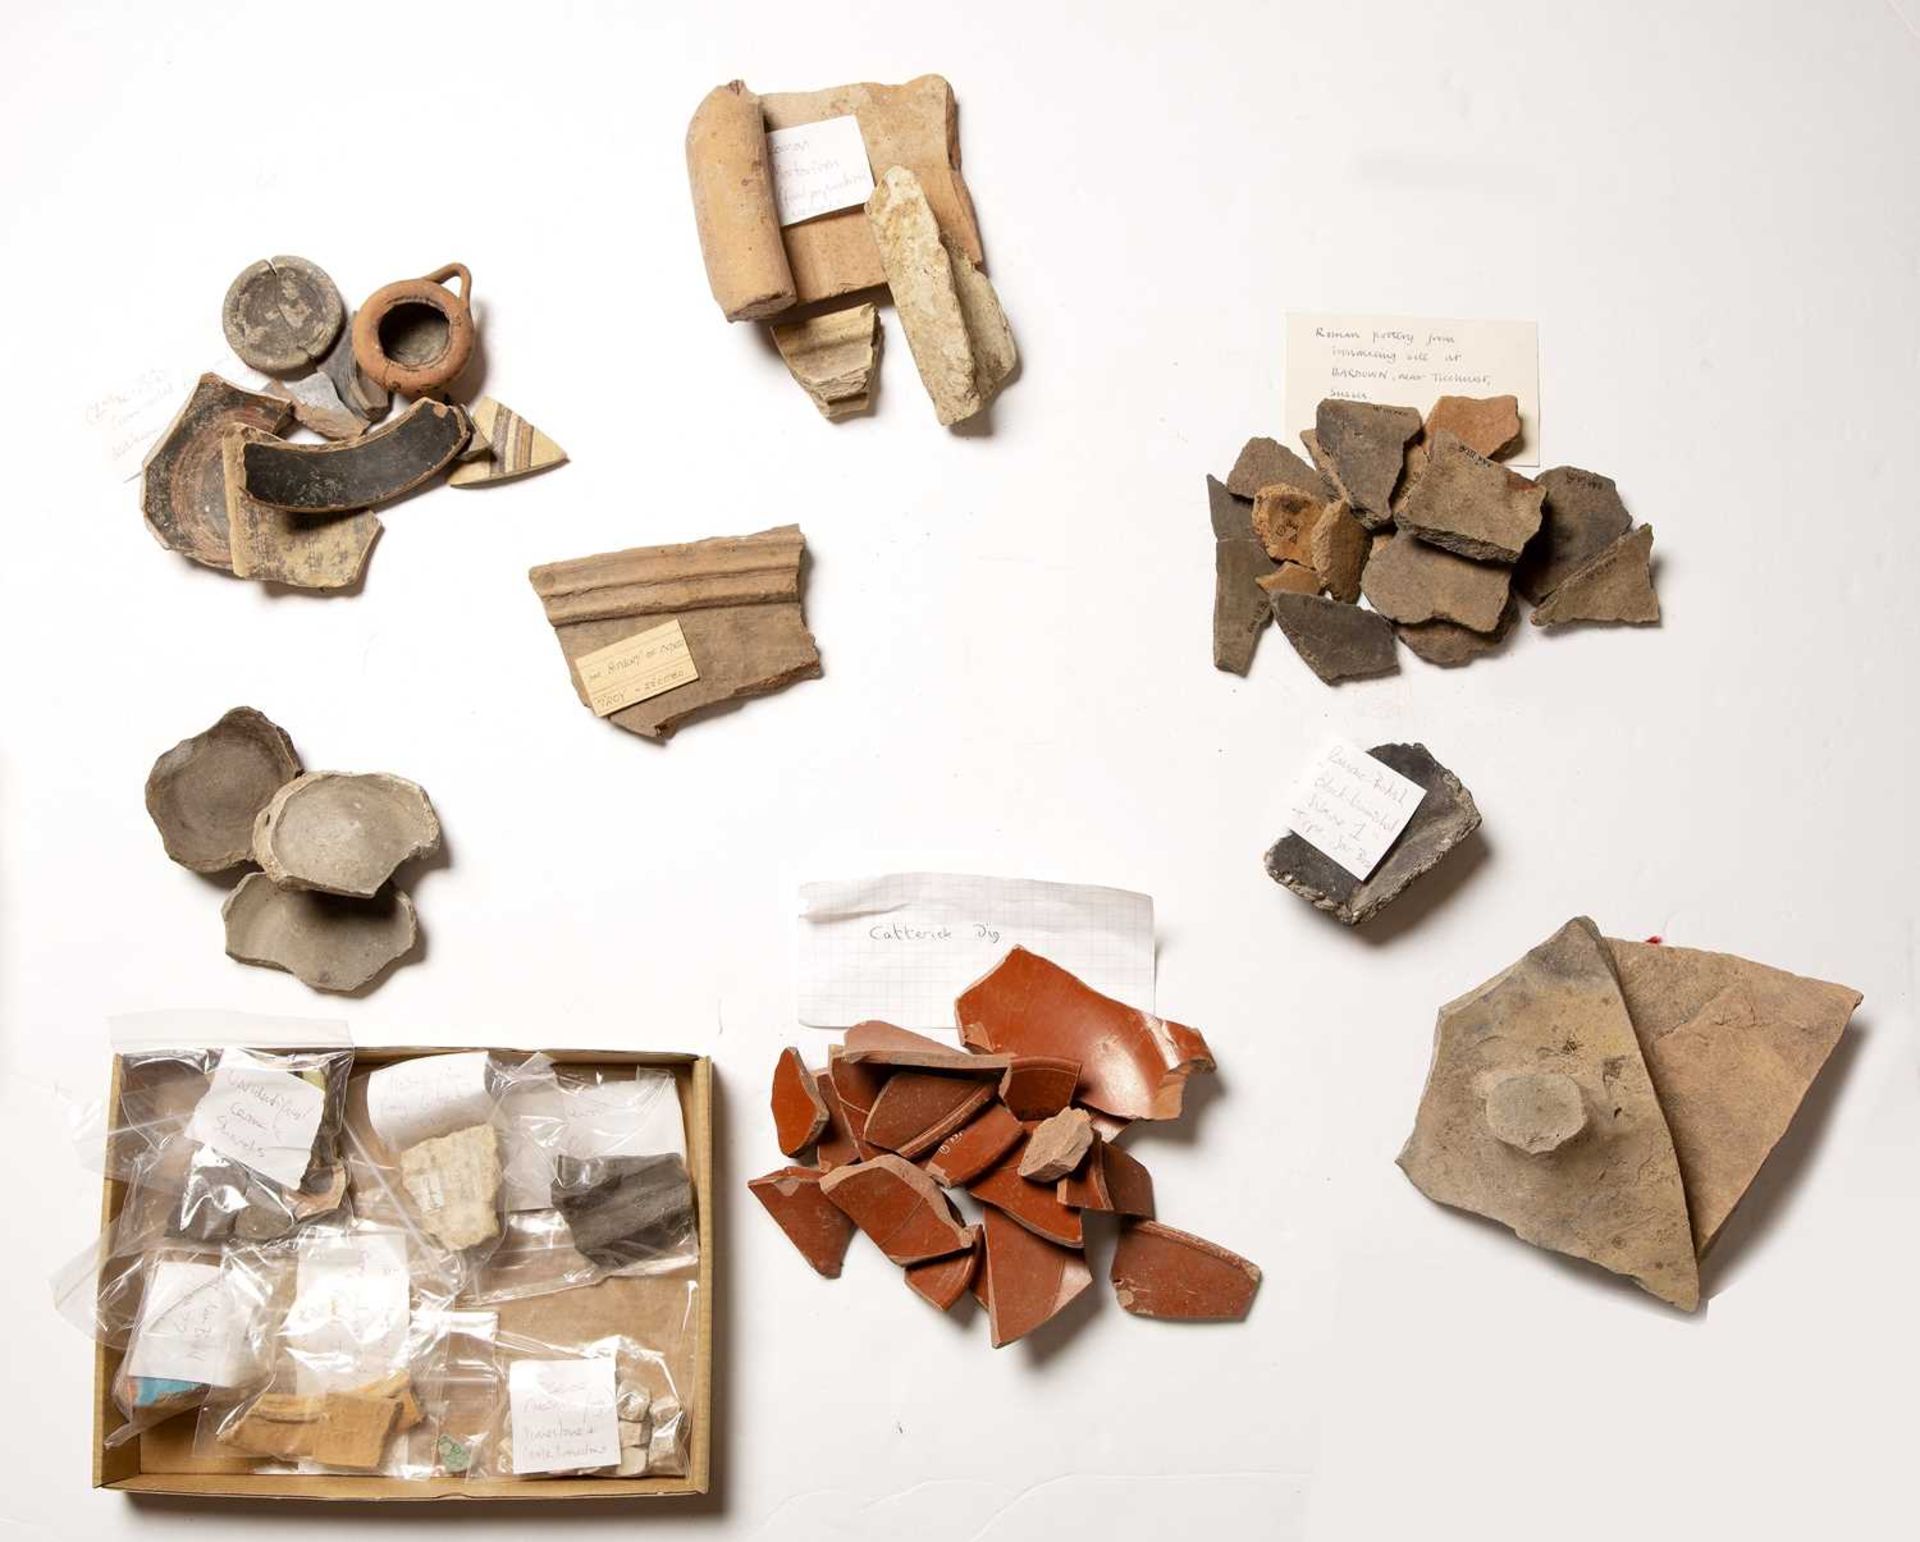 A collection of Roman pottery shards From the Canon Arthur Wycliffe Headlam 1826-1909 collection.